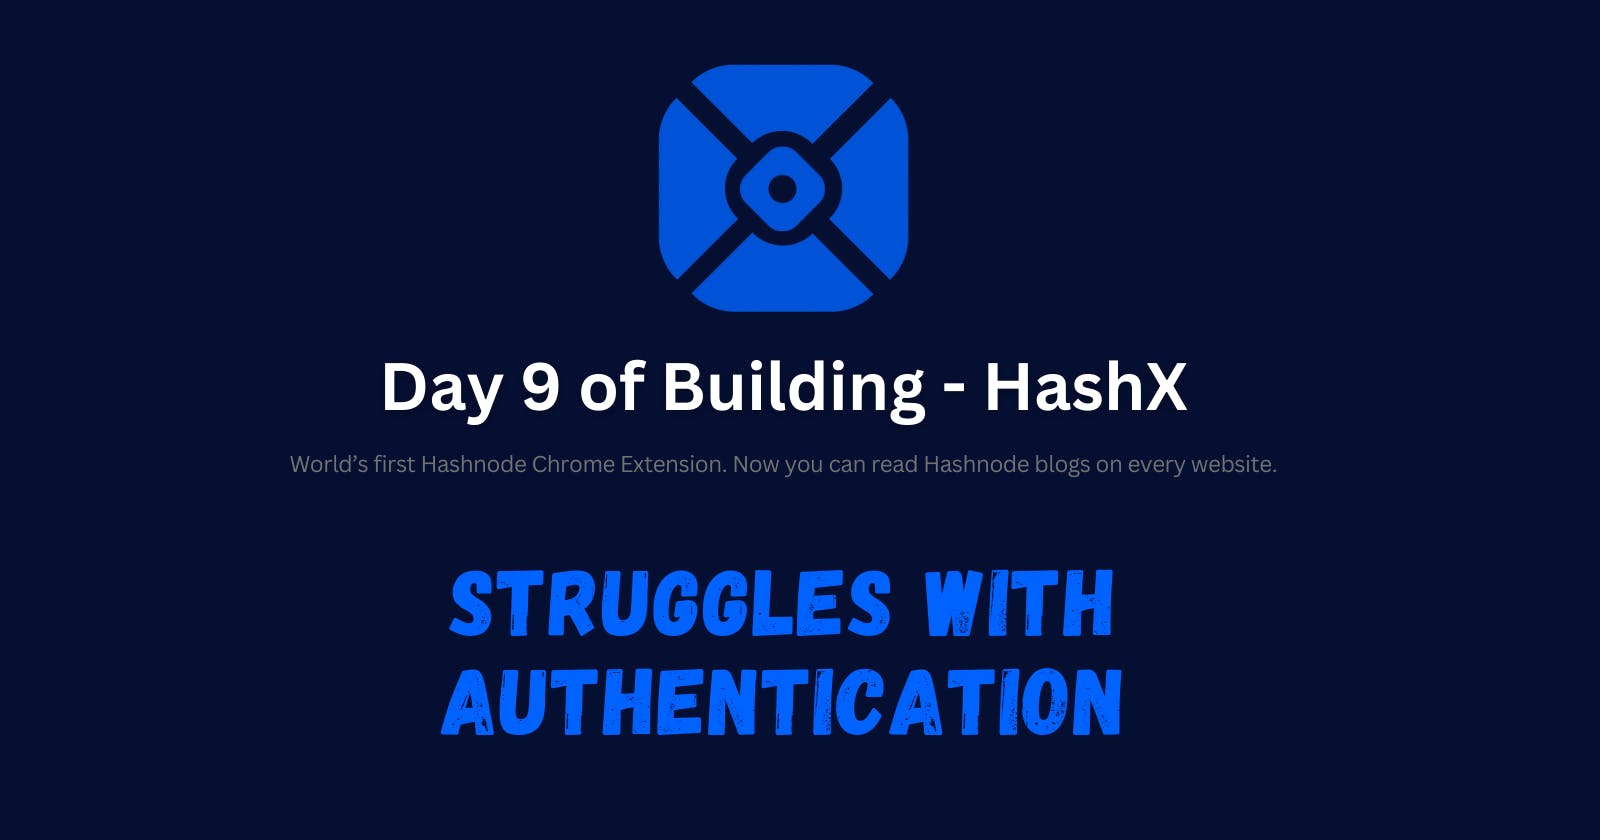 Day 9 - Struggles with Authentication